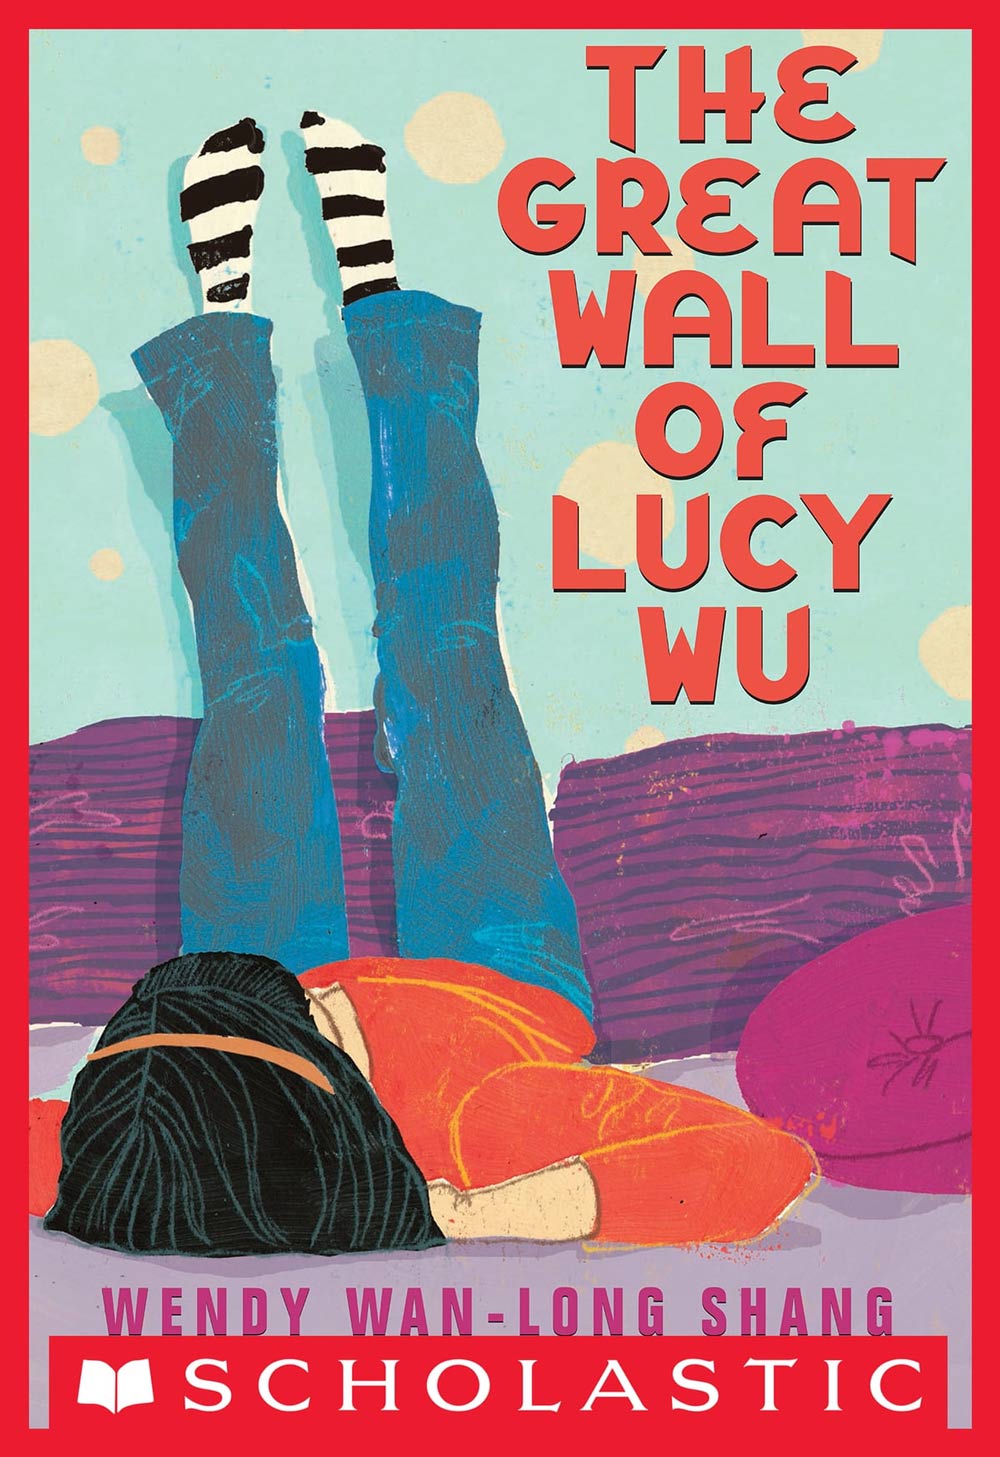 American Girl book cover, the Great Wall of Lucy Wu by Wendy Wan-Long Shang